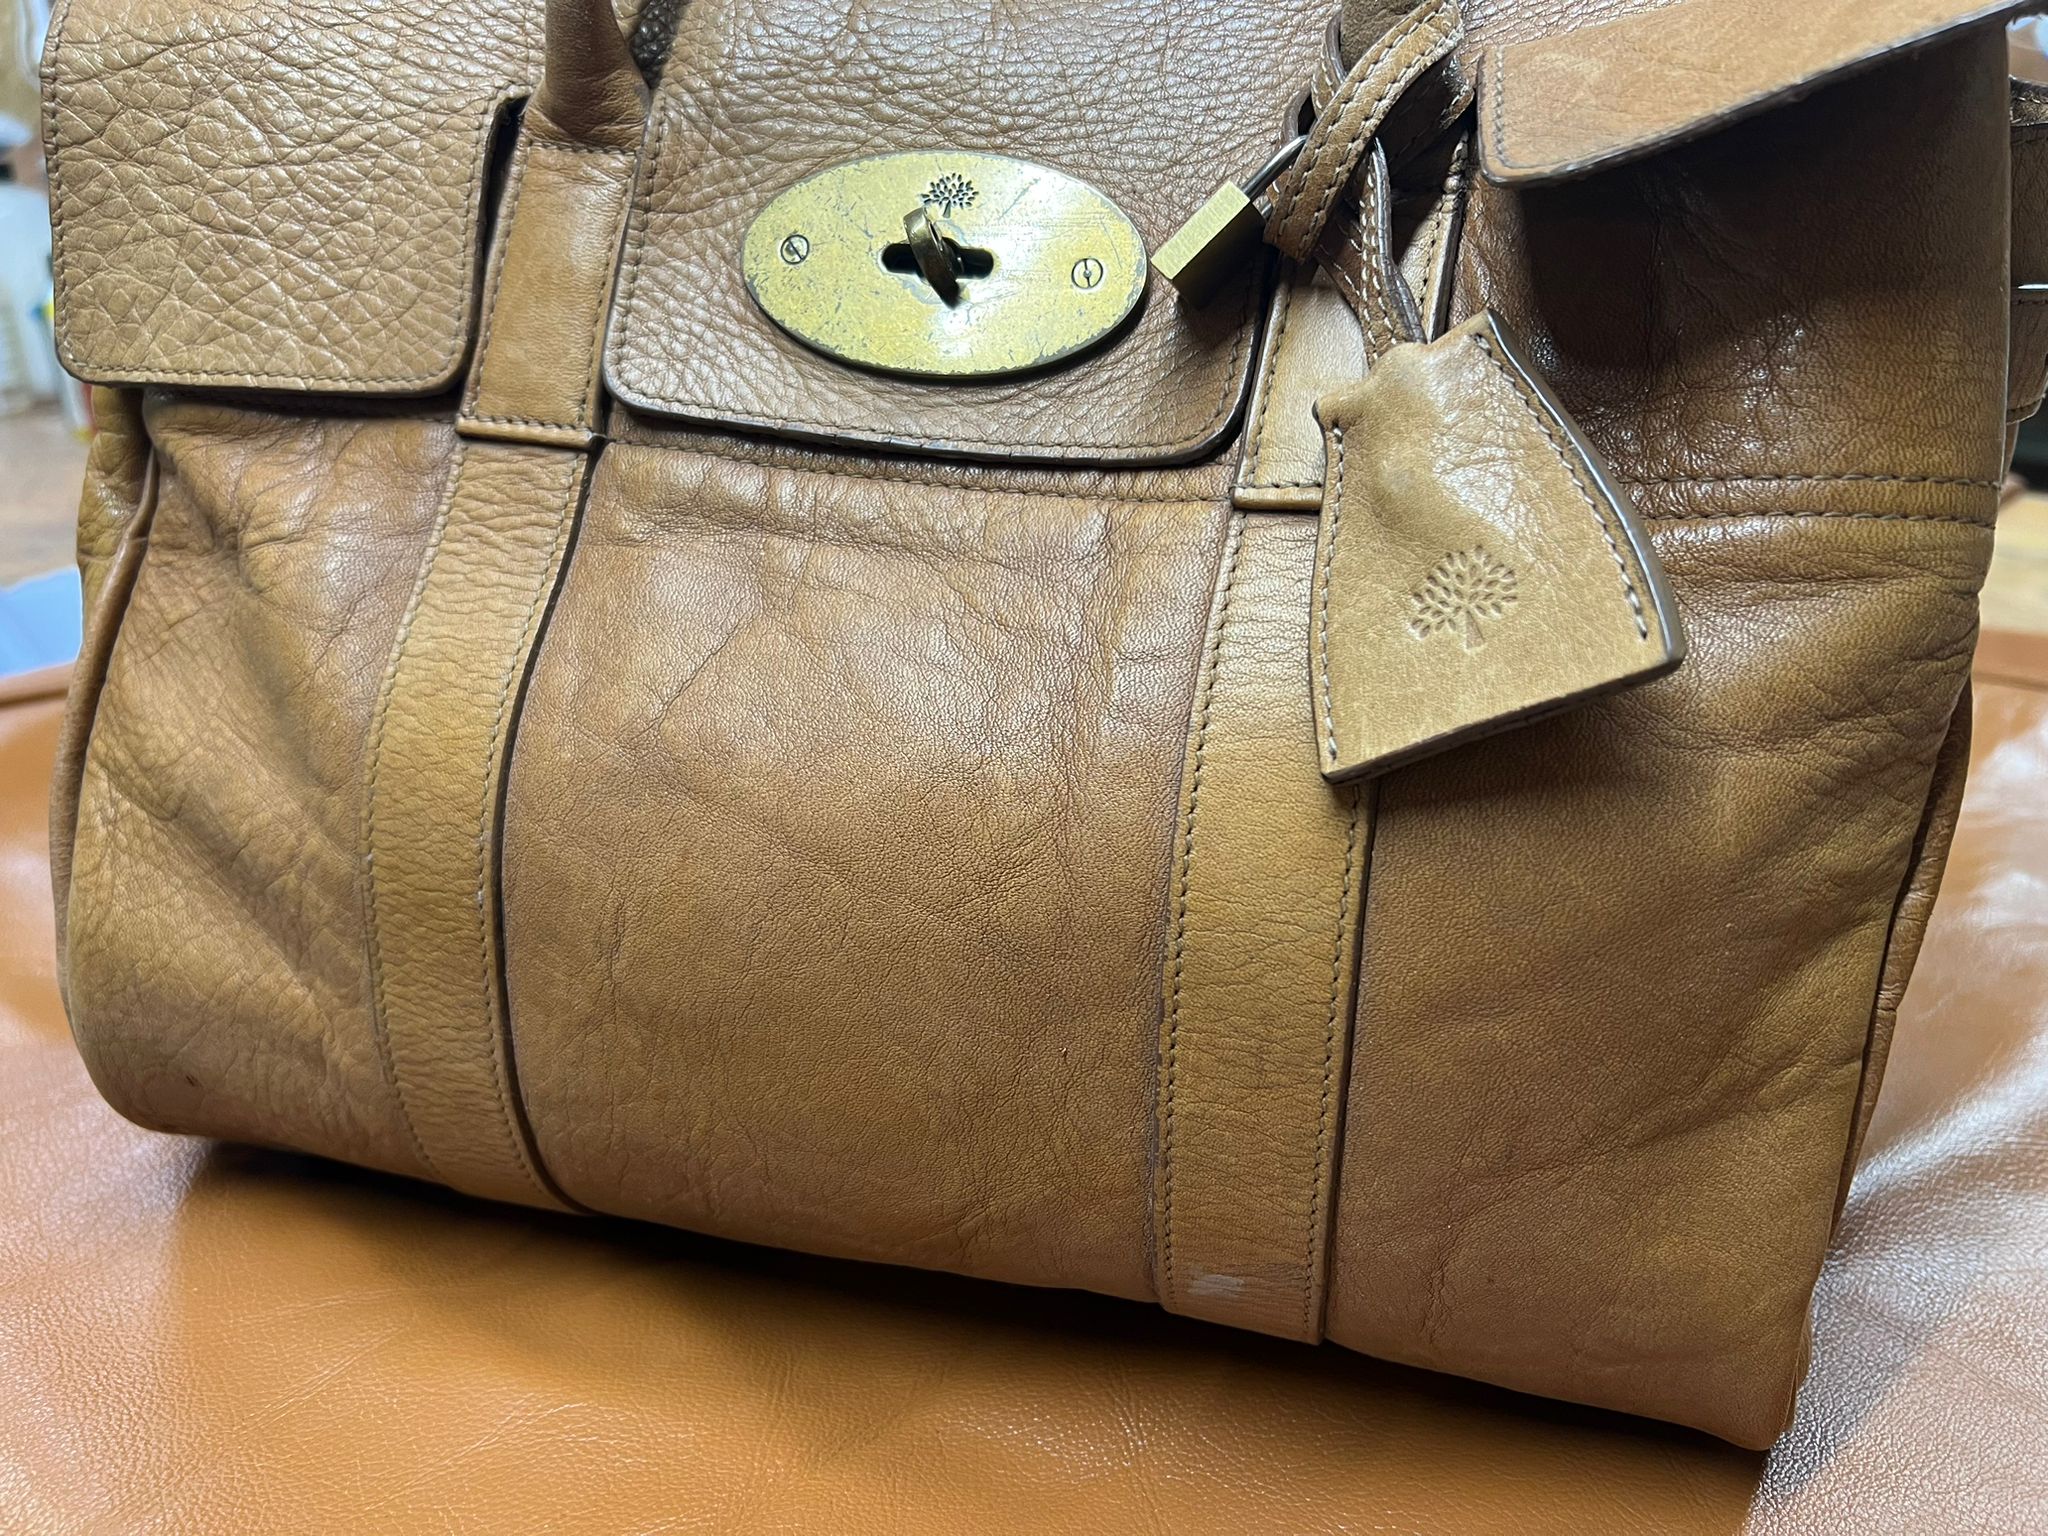 The leader in Handbag & Leather Restoration Services & Training. We provide  specialist cleaning, repairs, restoration and recolouring for handbags,  wallets & related goods. We also sell pre loved bags